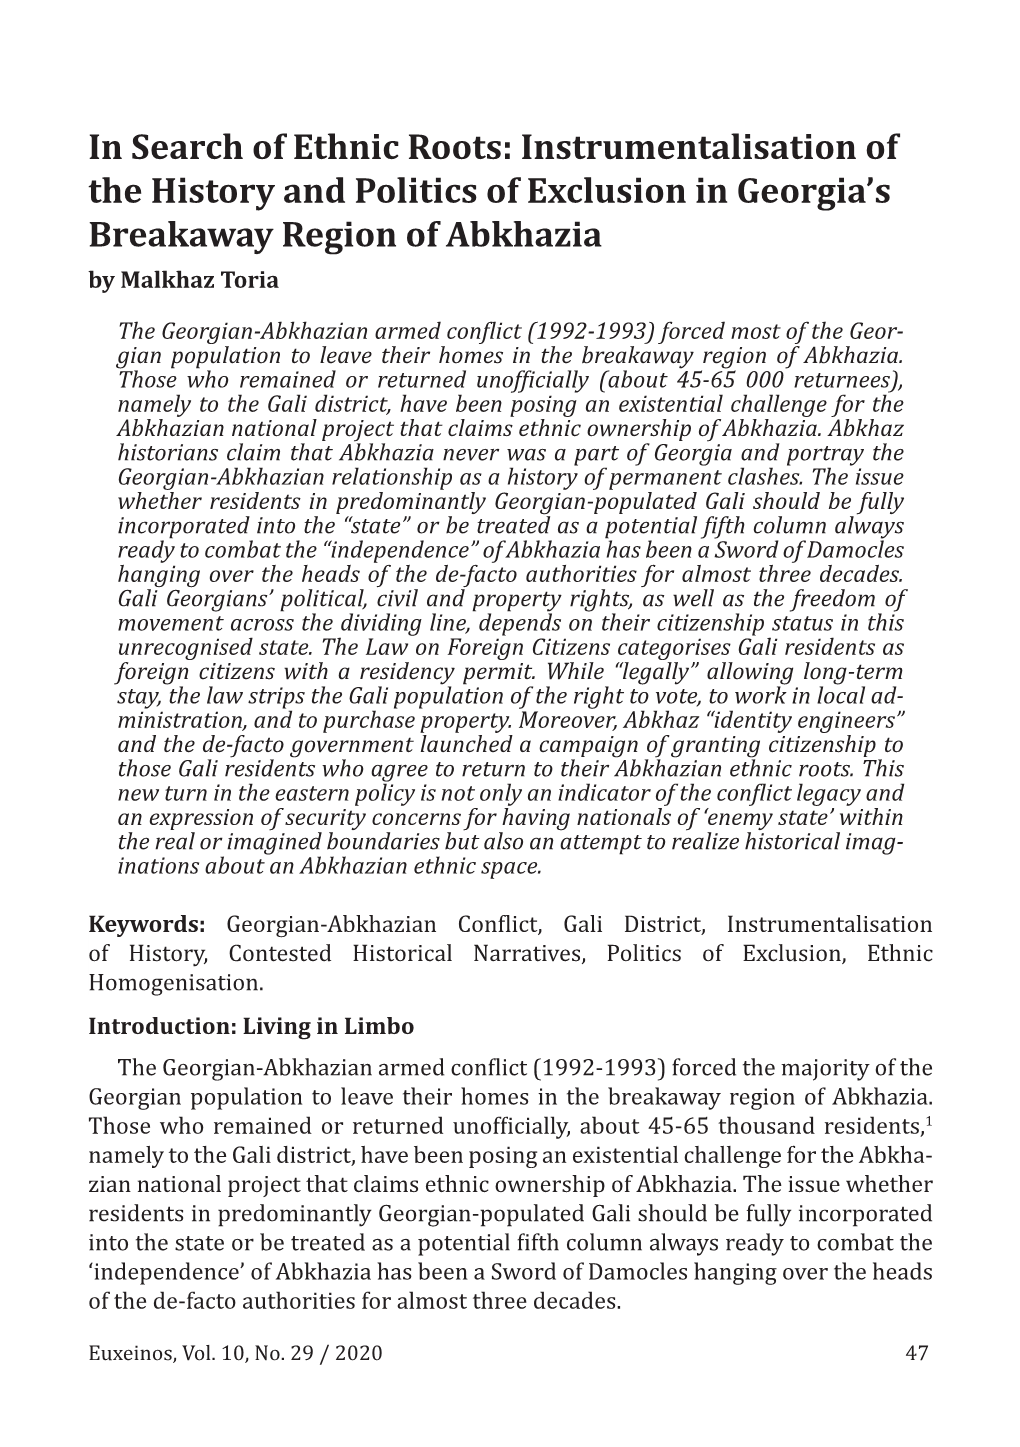 In Search of Ethnic Roots: Instrumentalisation of the History and Politics of Exclusion in Georgia’S Breakaway Region of Abkhazia by Malkhaz Toria